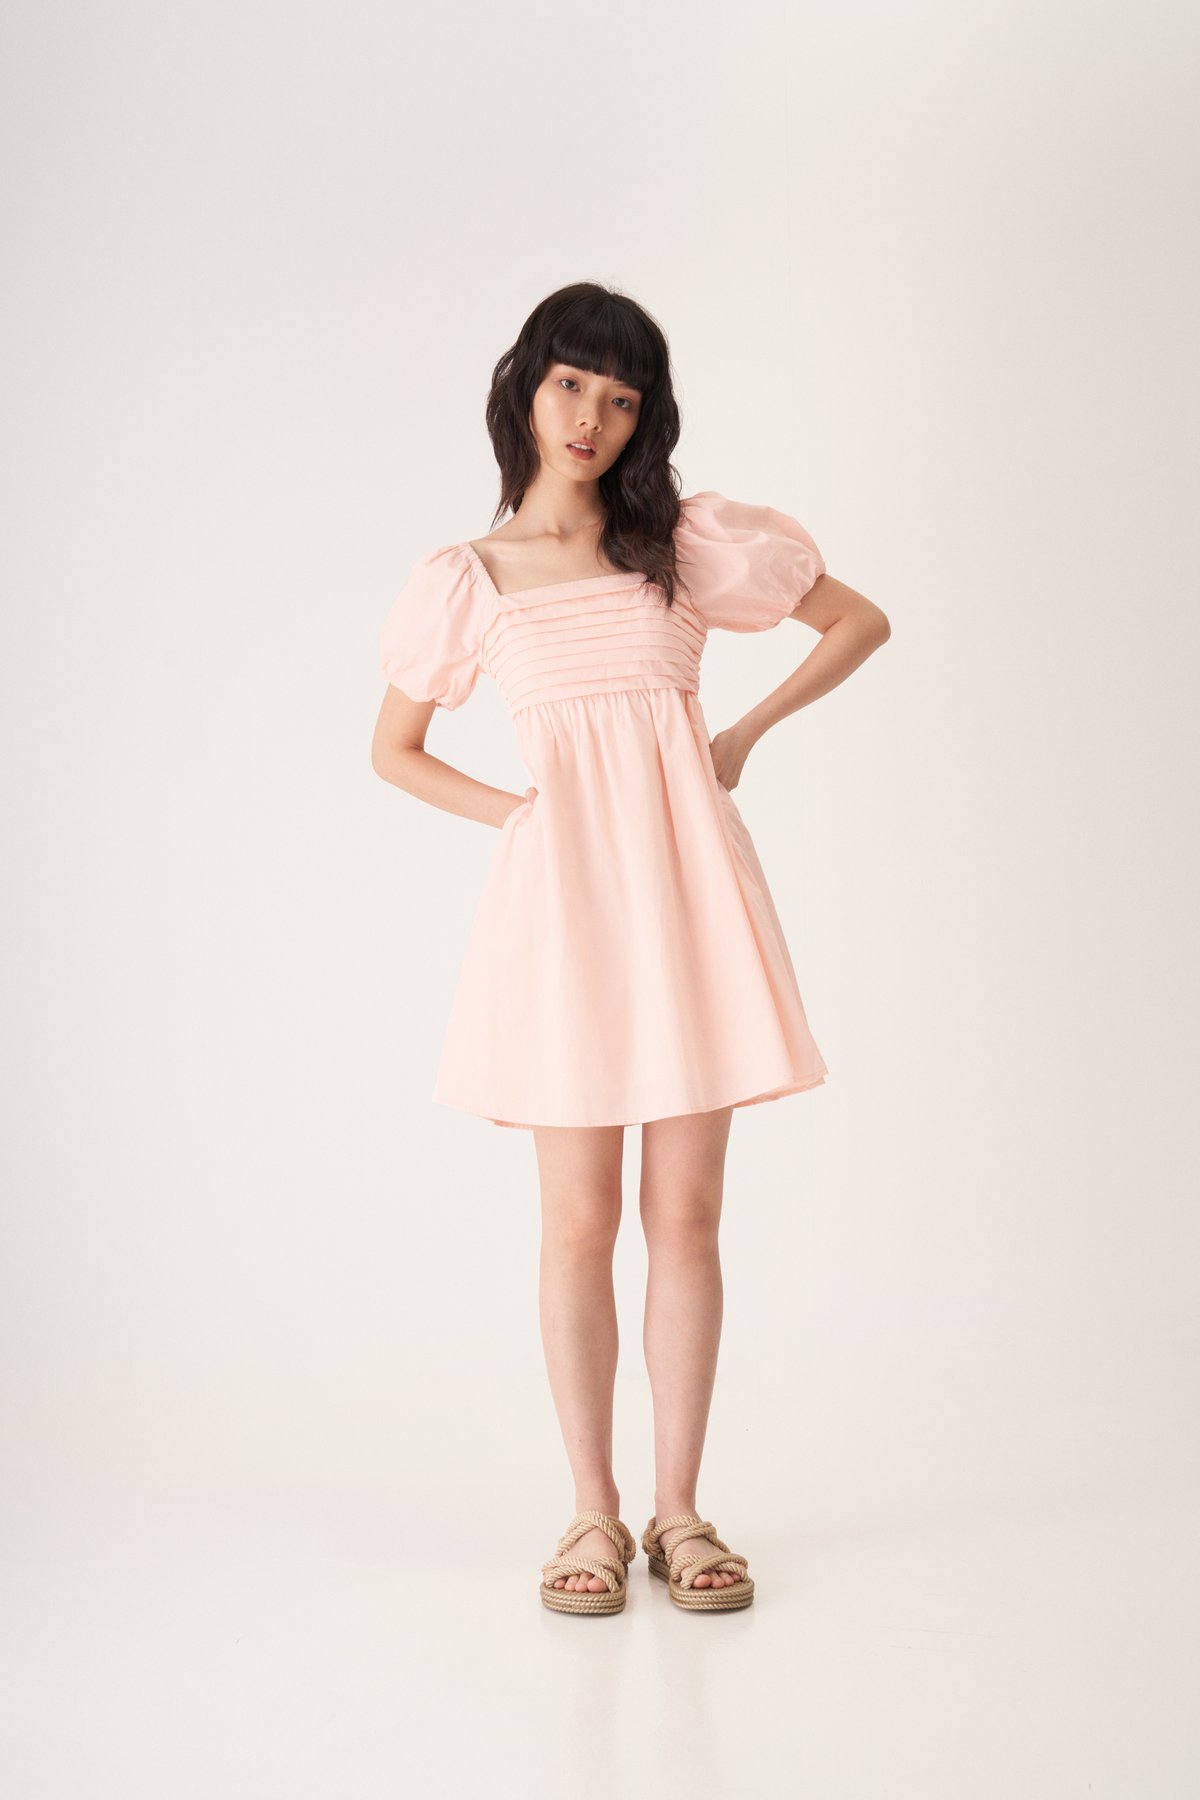 https://dum76bmz7do3s.cloudfront.net/sites/files/theclosetlover/images/products/202307/1200xAUTO/vienna_pleated_babydoll_dress_in_light_pink-2.jpg